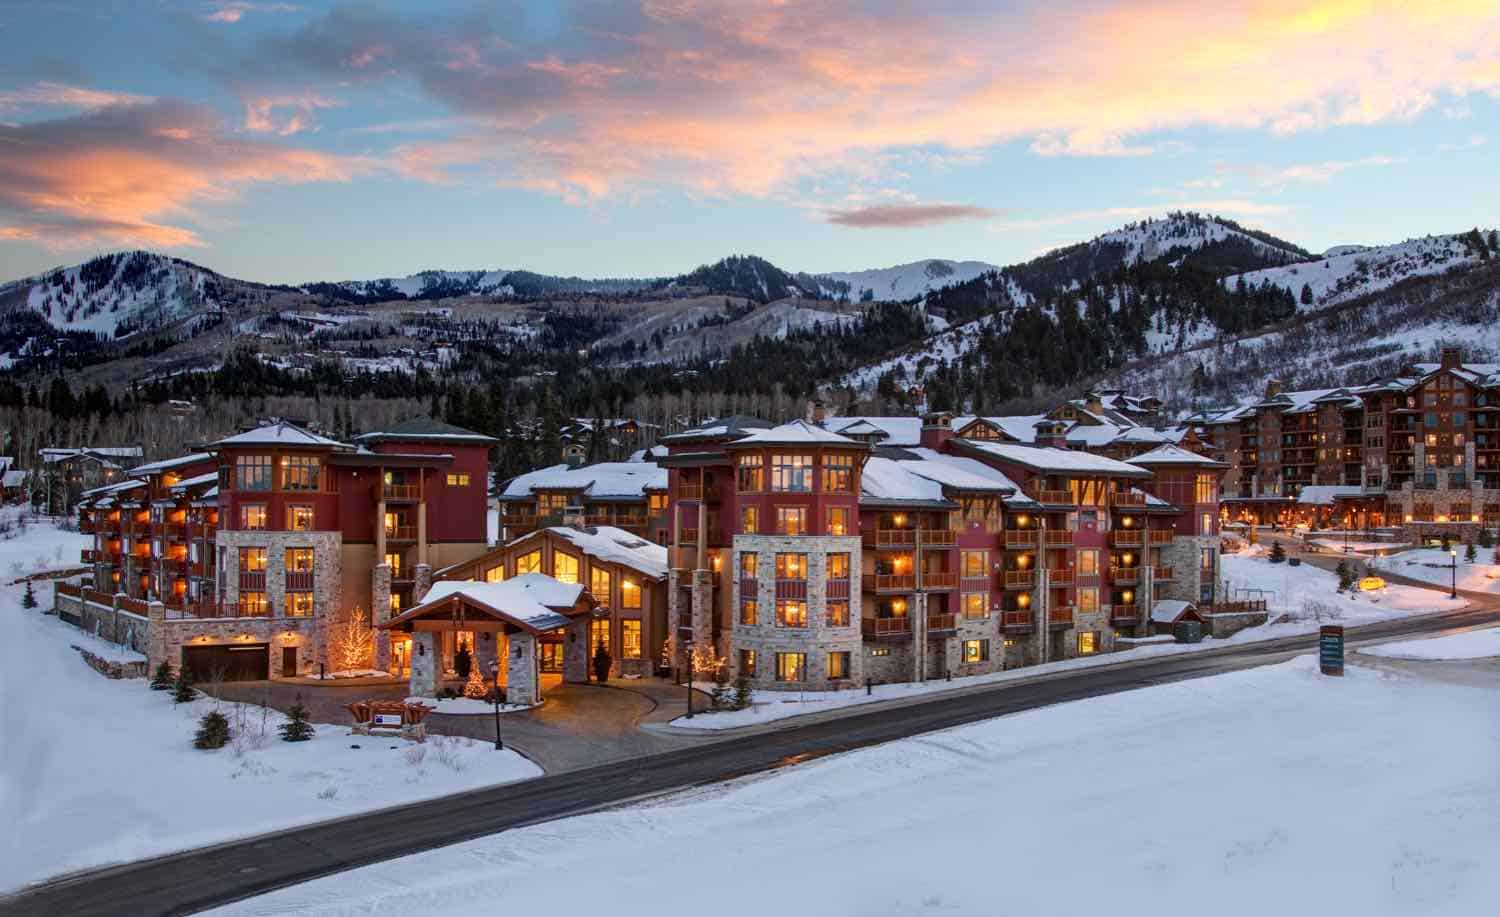 Buildings in a ski village surrounded by mountains and snow